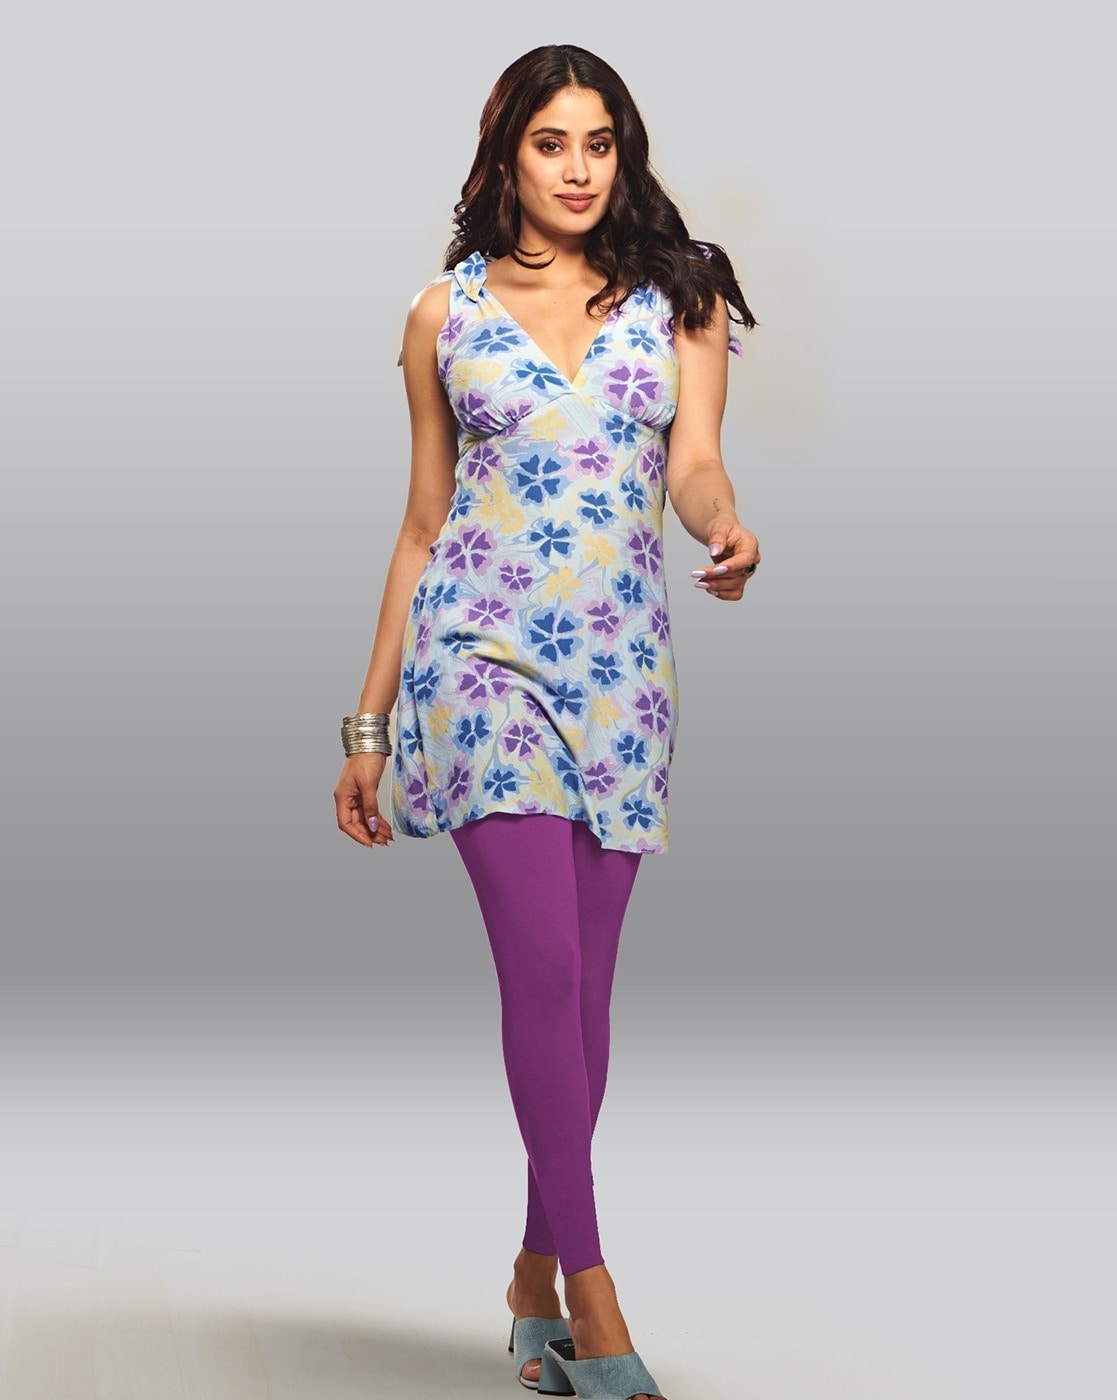 Buy Lyra Women's Lilac solid Ankle Leggings Online at Best Prices in India  - JioMart.